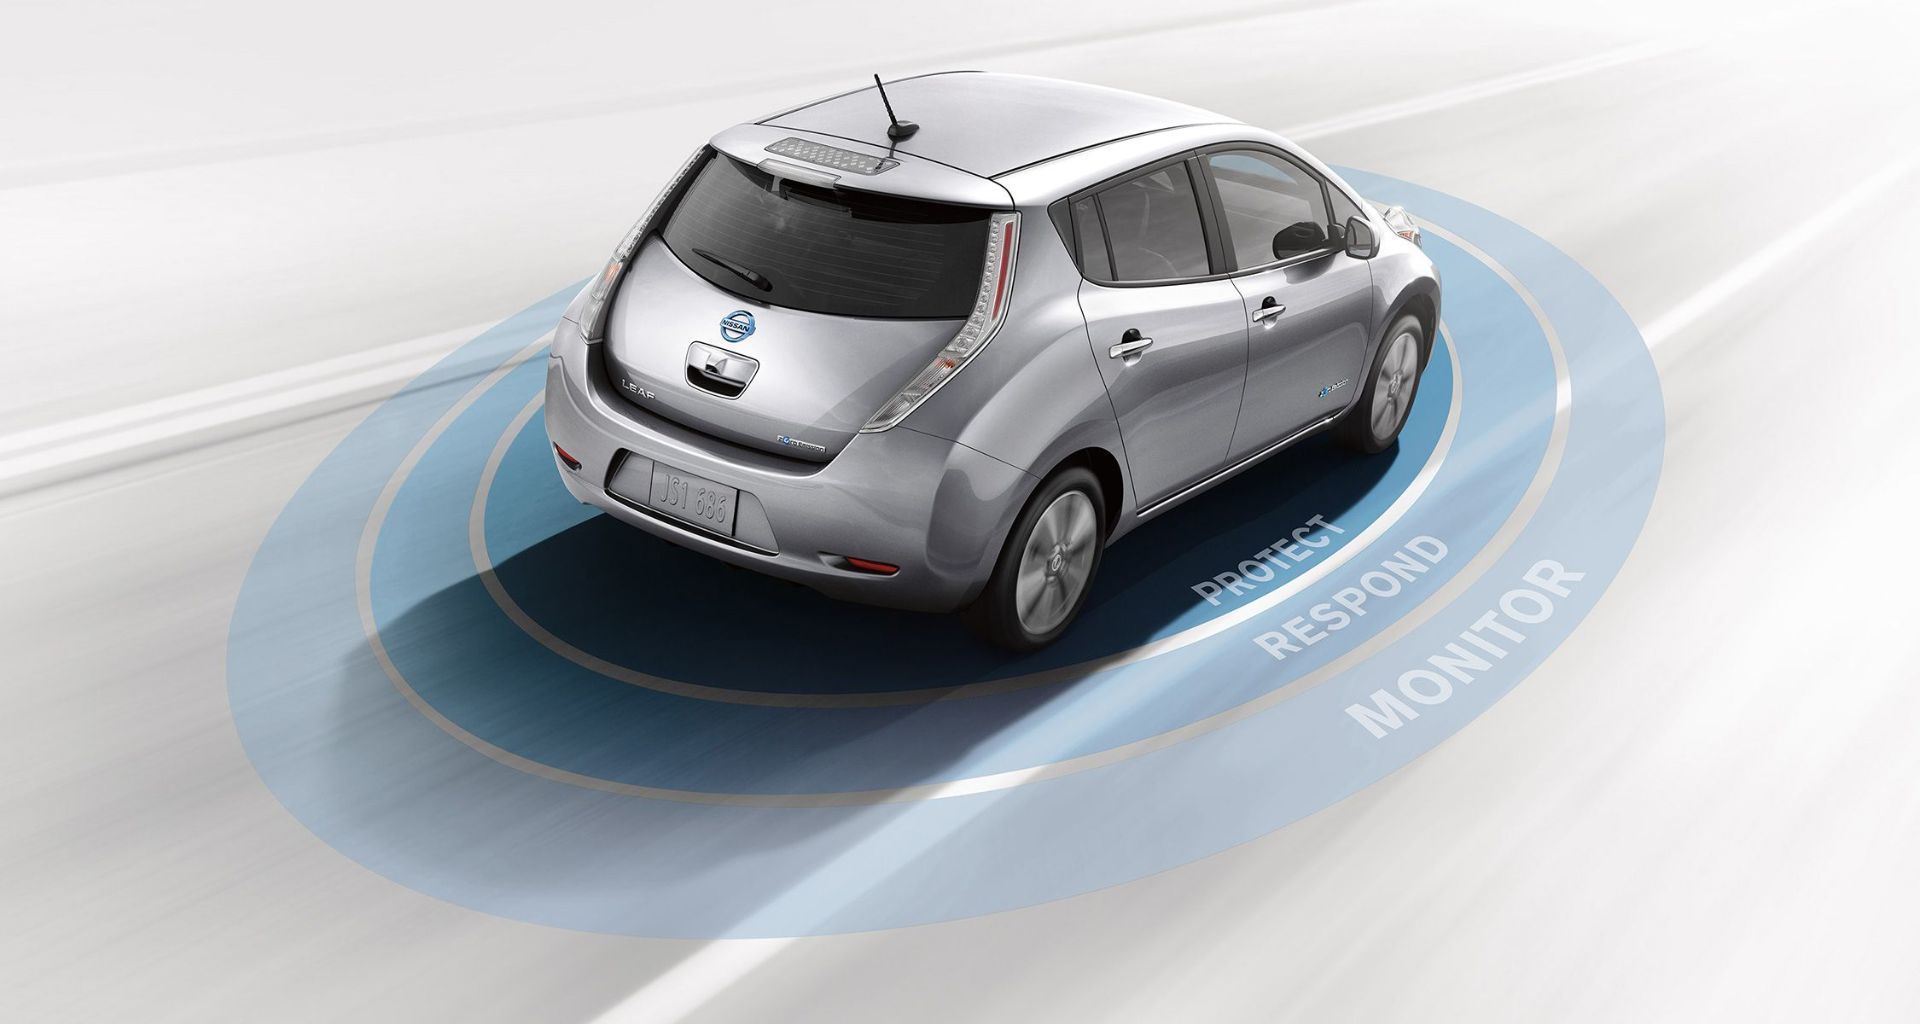 What is Nissan Intelligent Mobility?